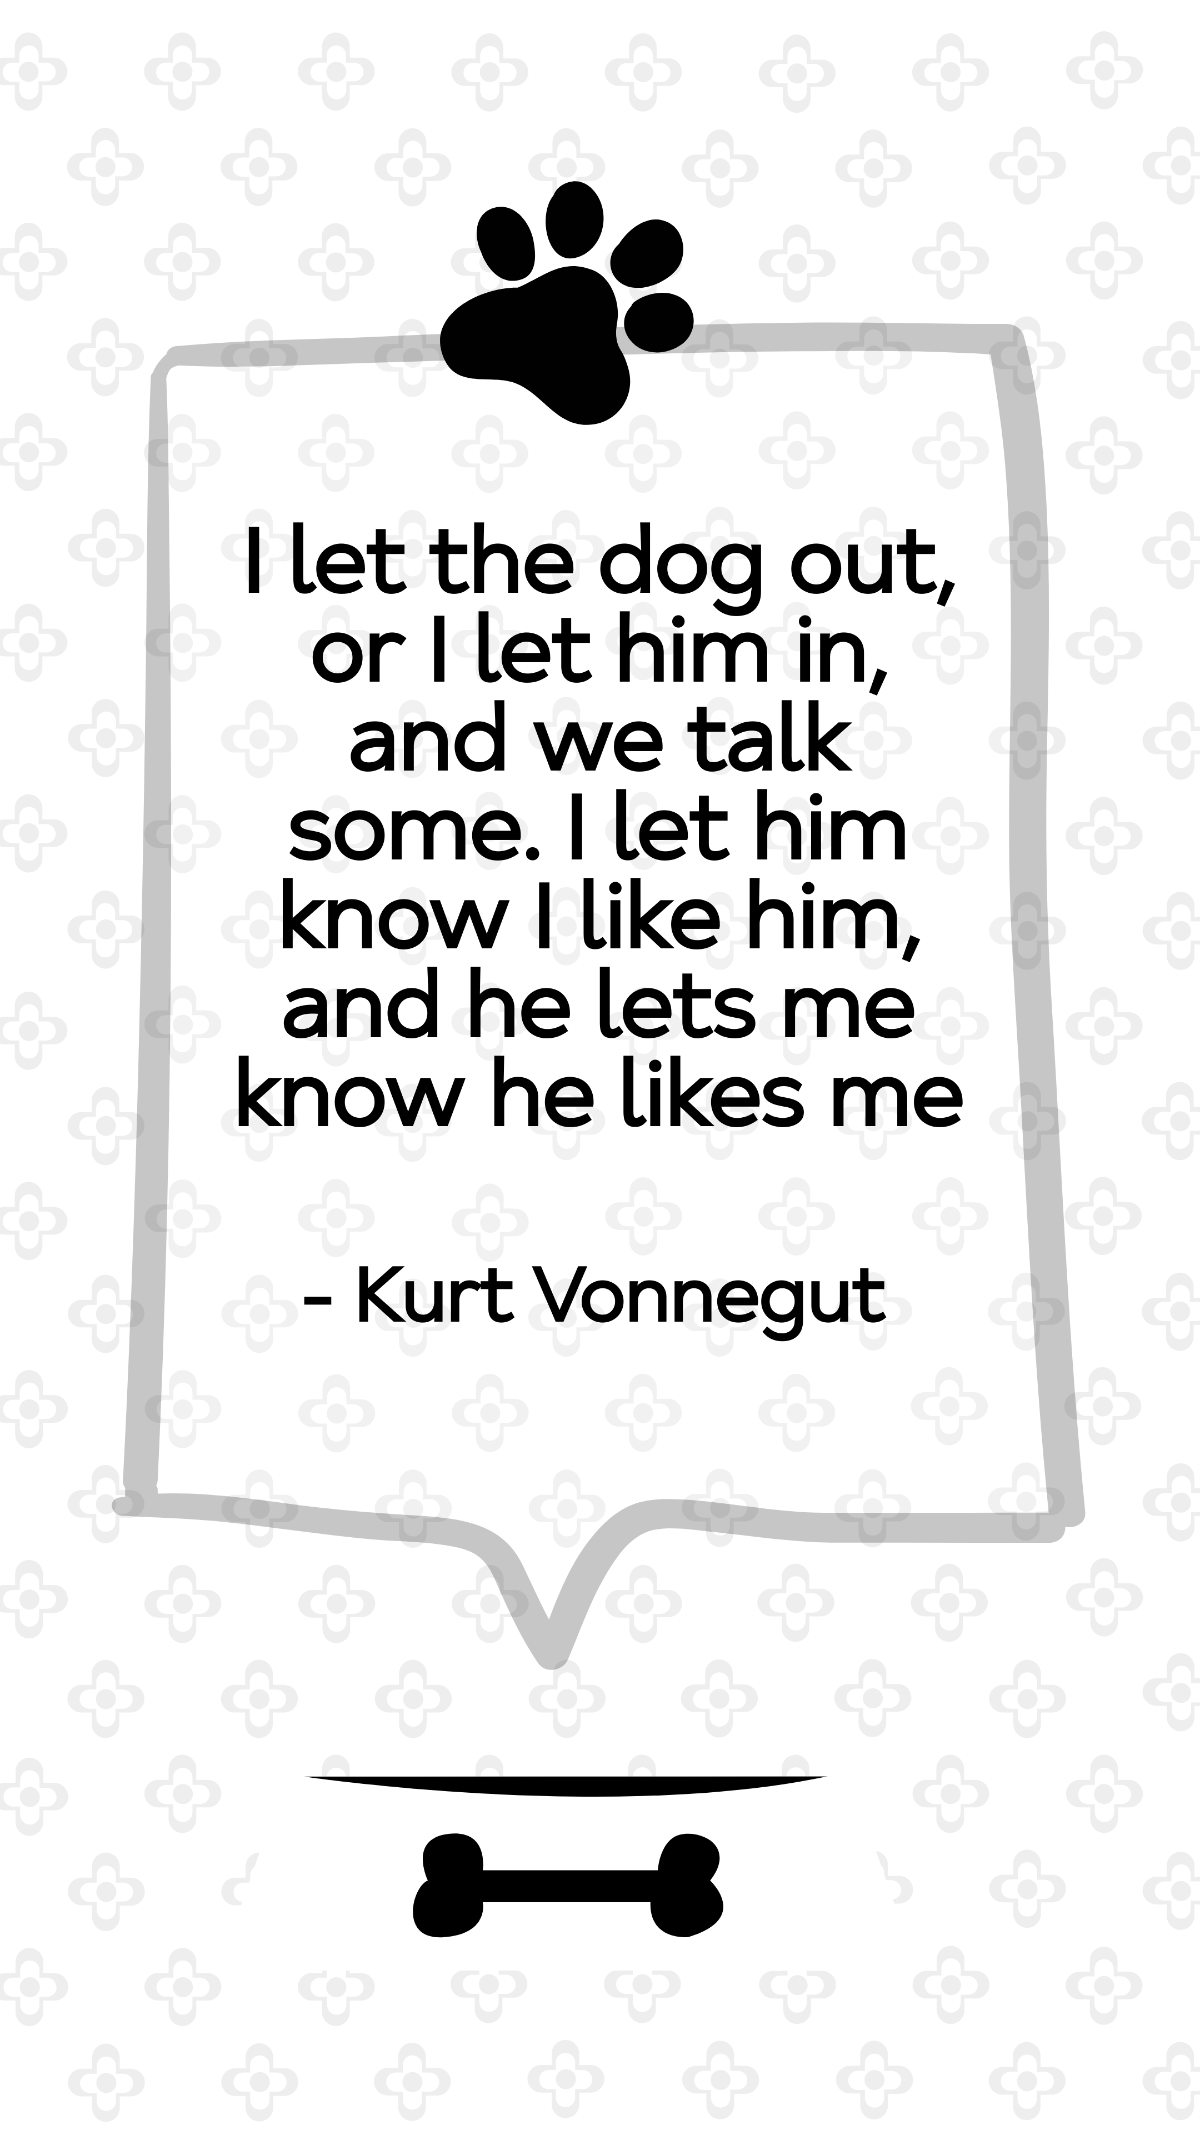 Free Kurt Vonnegut - I let the dog out, or I let him in, and we talk some. I let him know I like him, and he lets me know he likes me Template